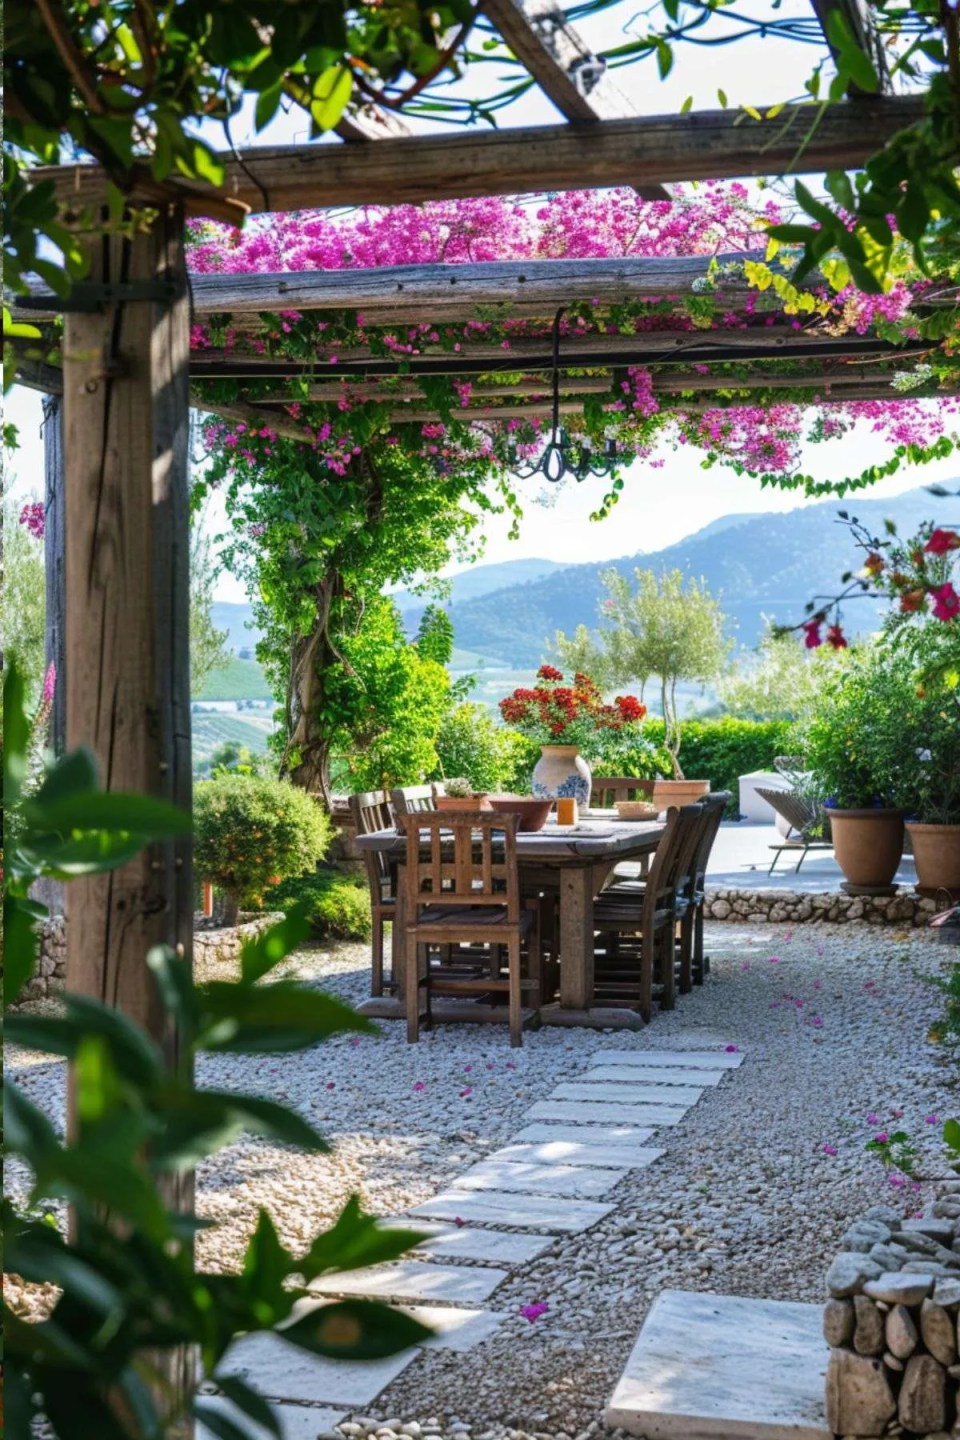 a garden dining table and chair set under a pergola in a mediterranean garden. There is bougainvillea growing up the pergola with olive trees in the background